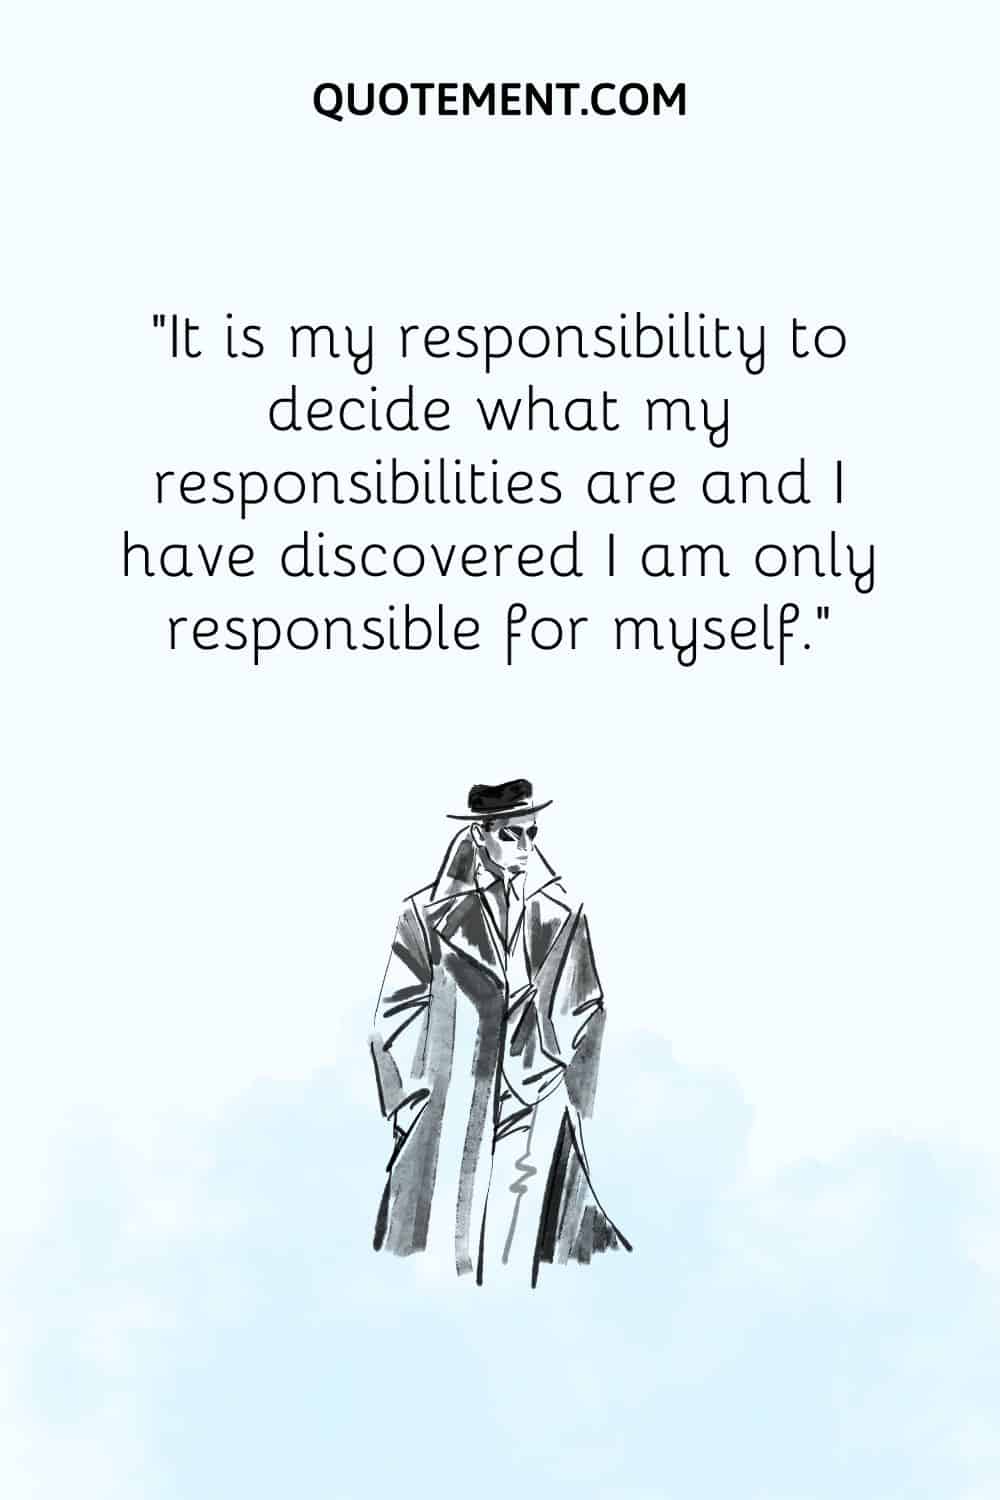 It is my responsibility to decide what my responsibilities are and I have discovered I am only responsible for myself